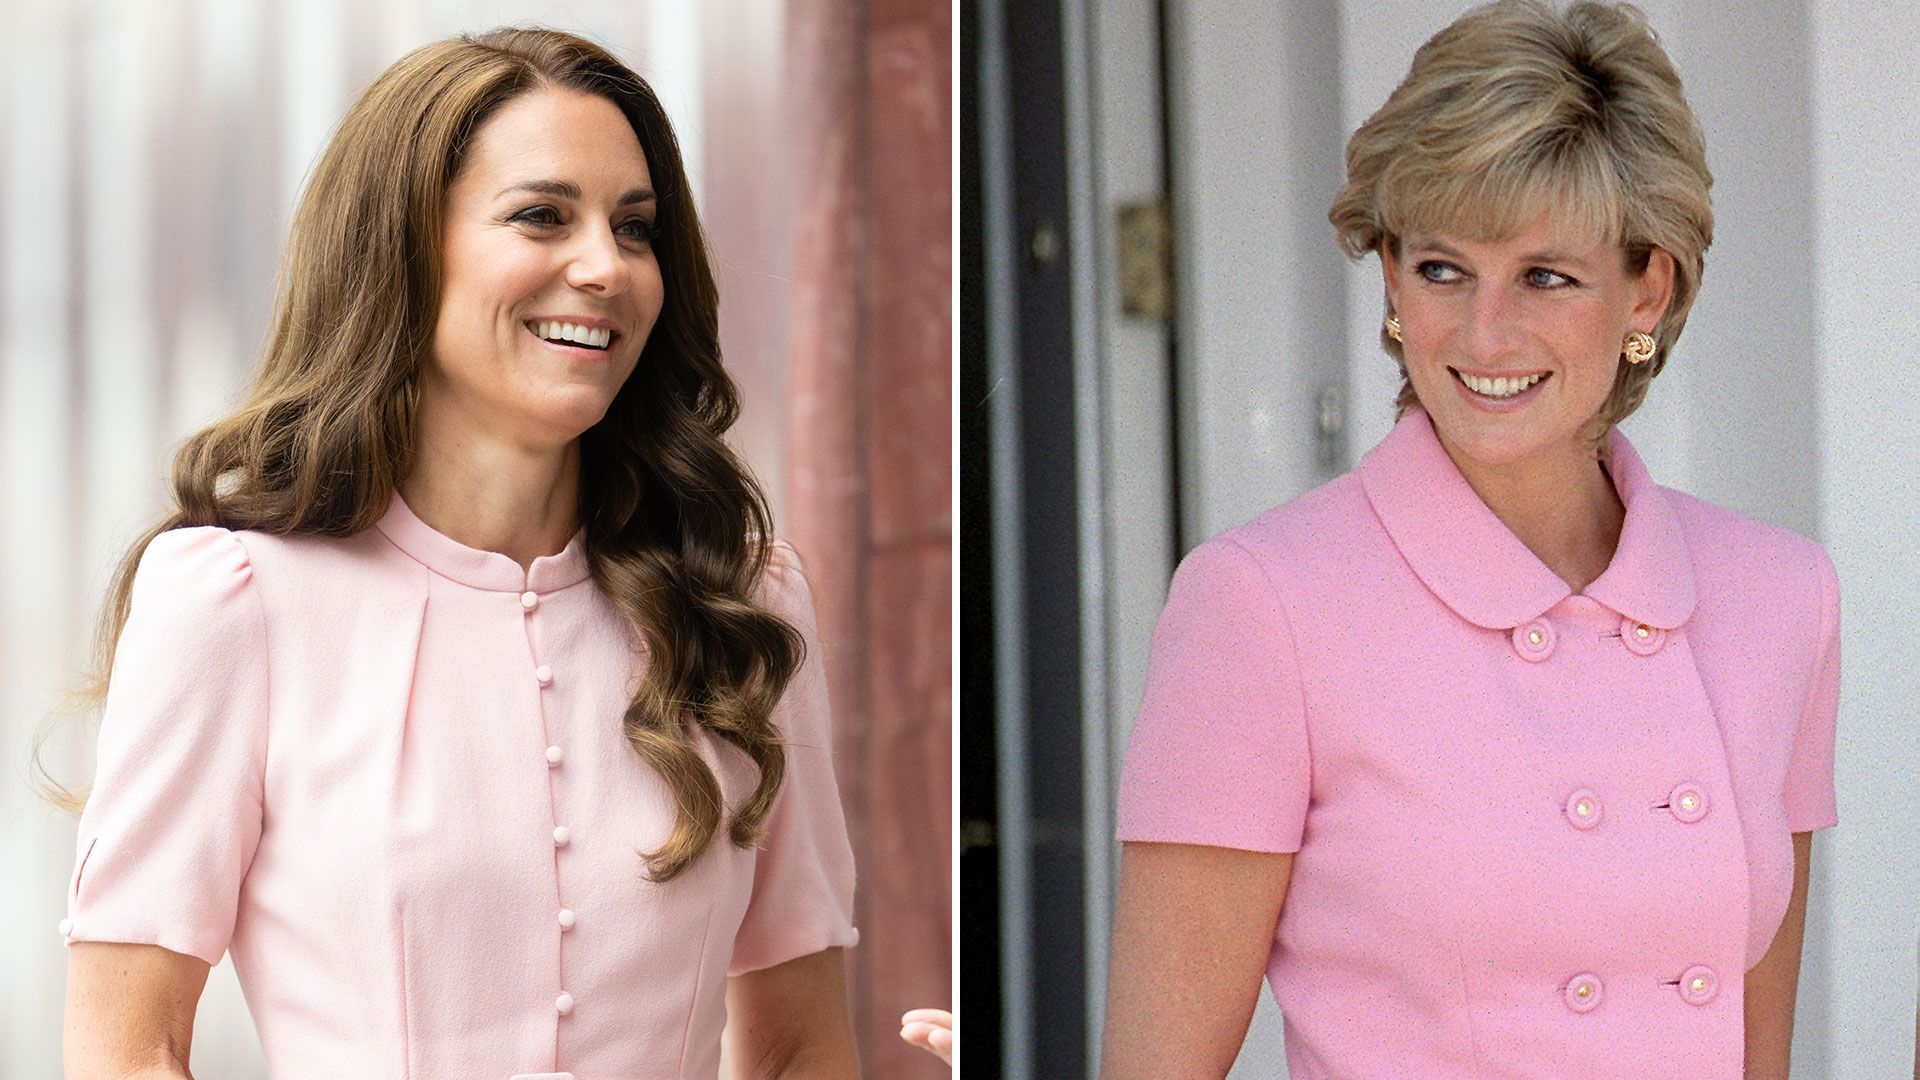 Diana and Kate in pink